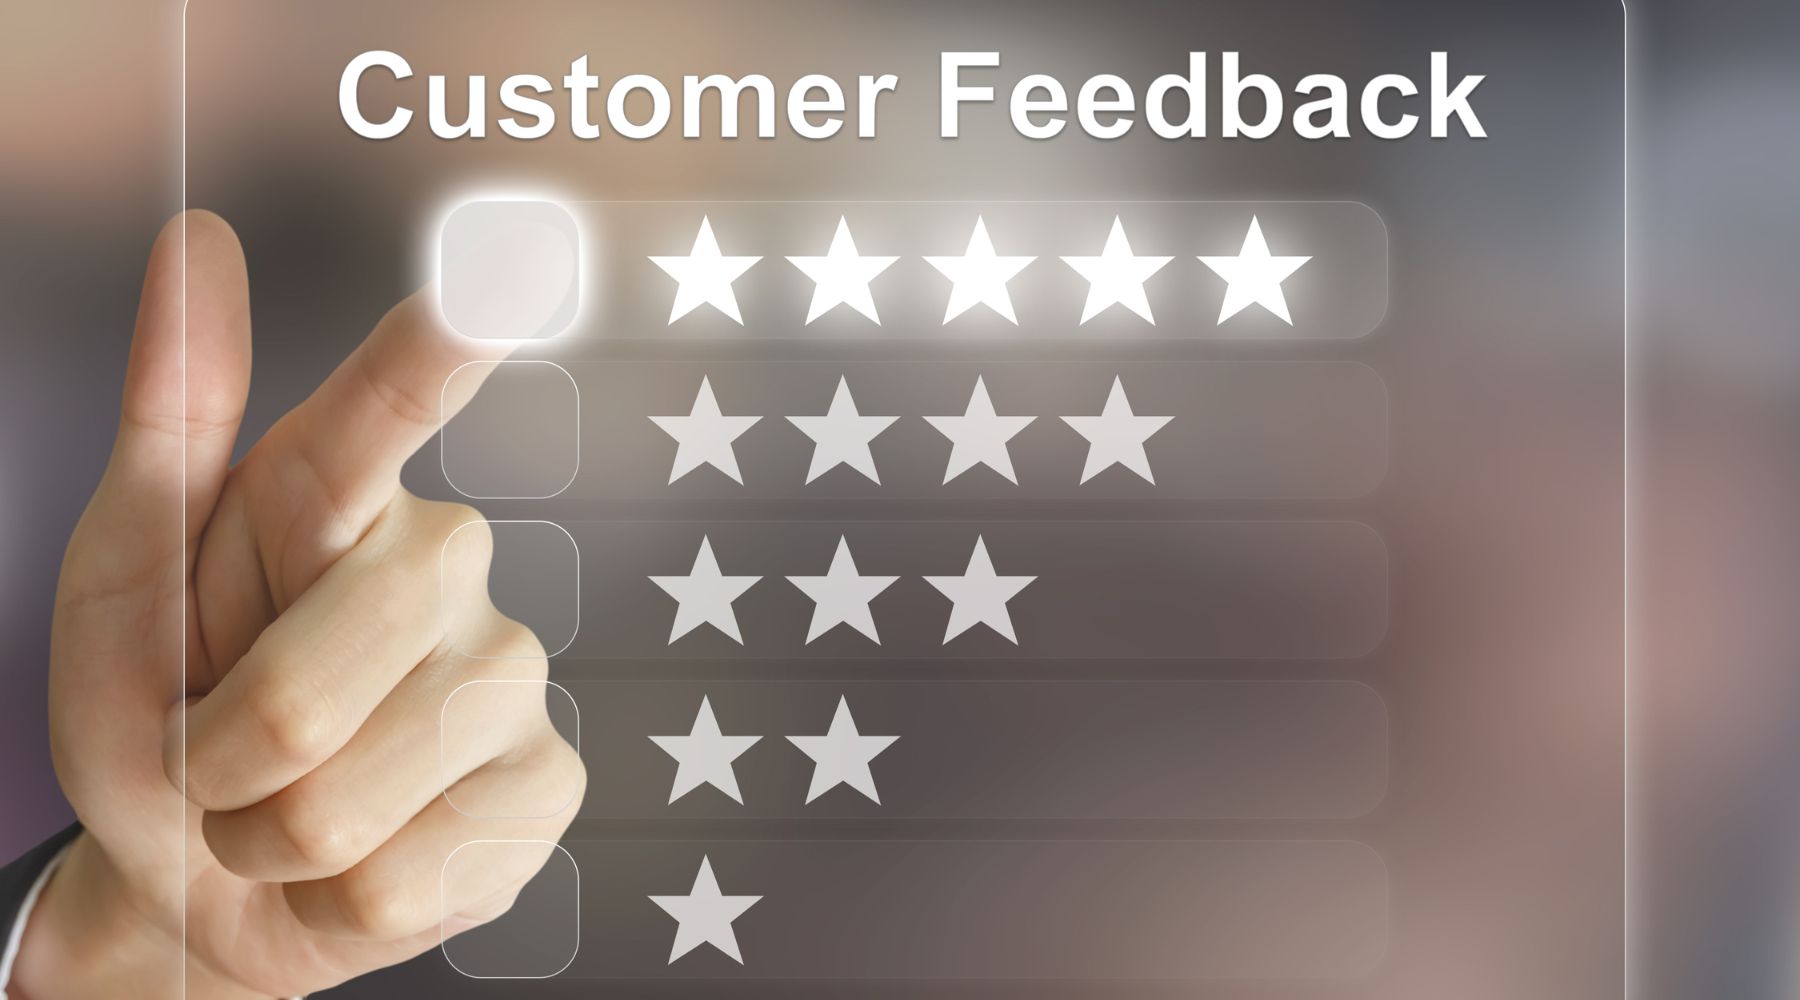 A picture of a finger pointing to 5 stars to represent customer feedback